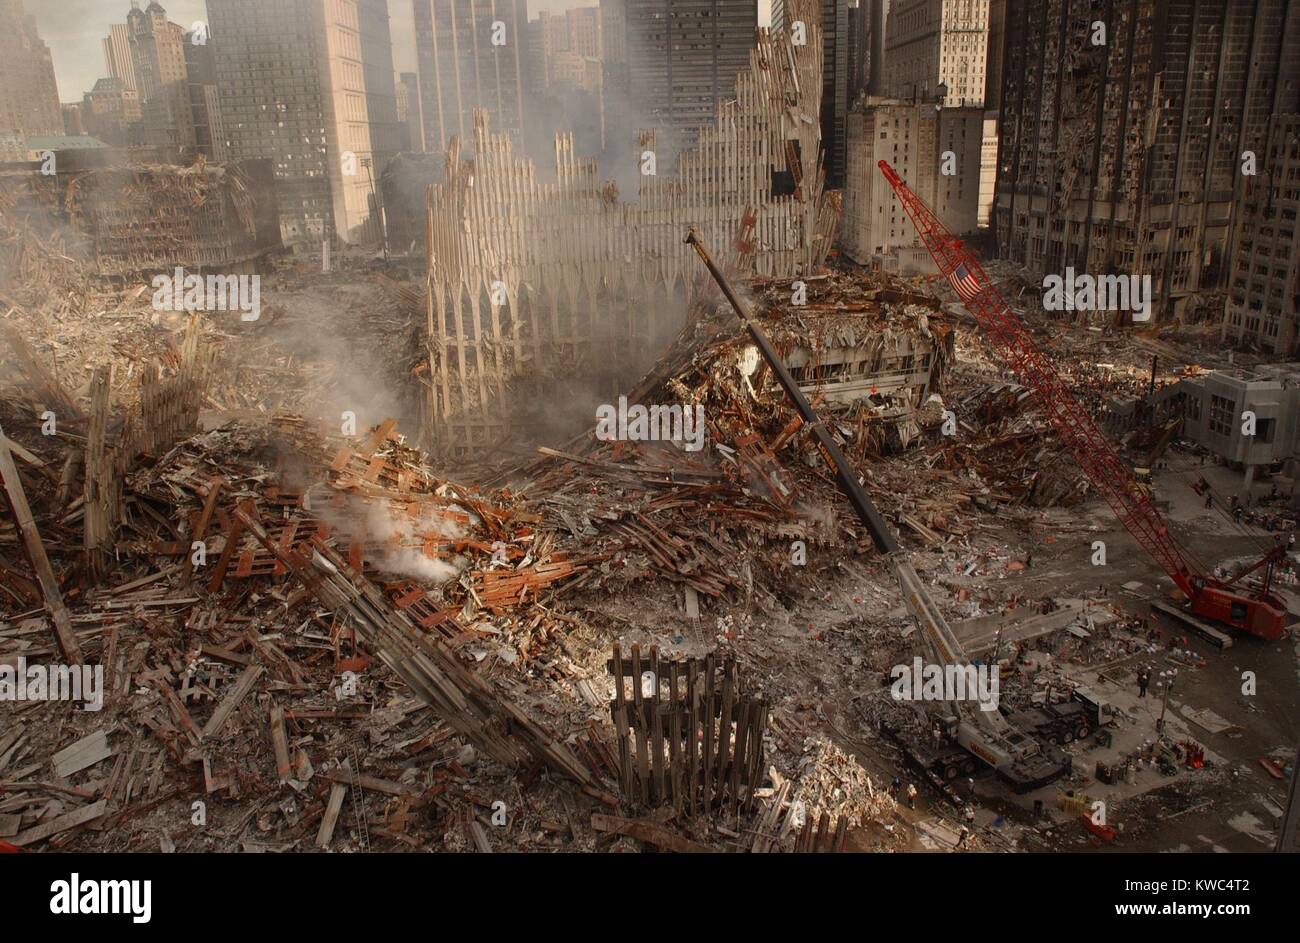 Wide view of recovery operations at the World Trade Center, New York City, Sept 17, 2001. In the center is the pile and remains of the WTC 2, the South Tower and WTC 3, Marriott World Trade Center, once a 22 story hotel. After September 11, 2001 terrorist attacks. (BSLOC 2015 2 93) Stock Photo